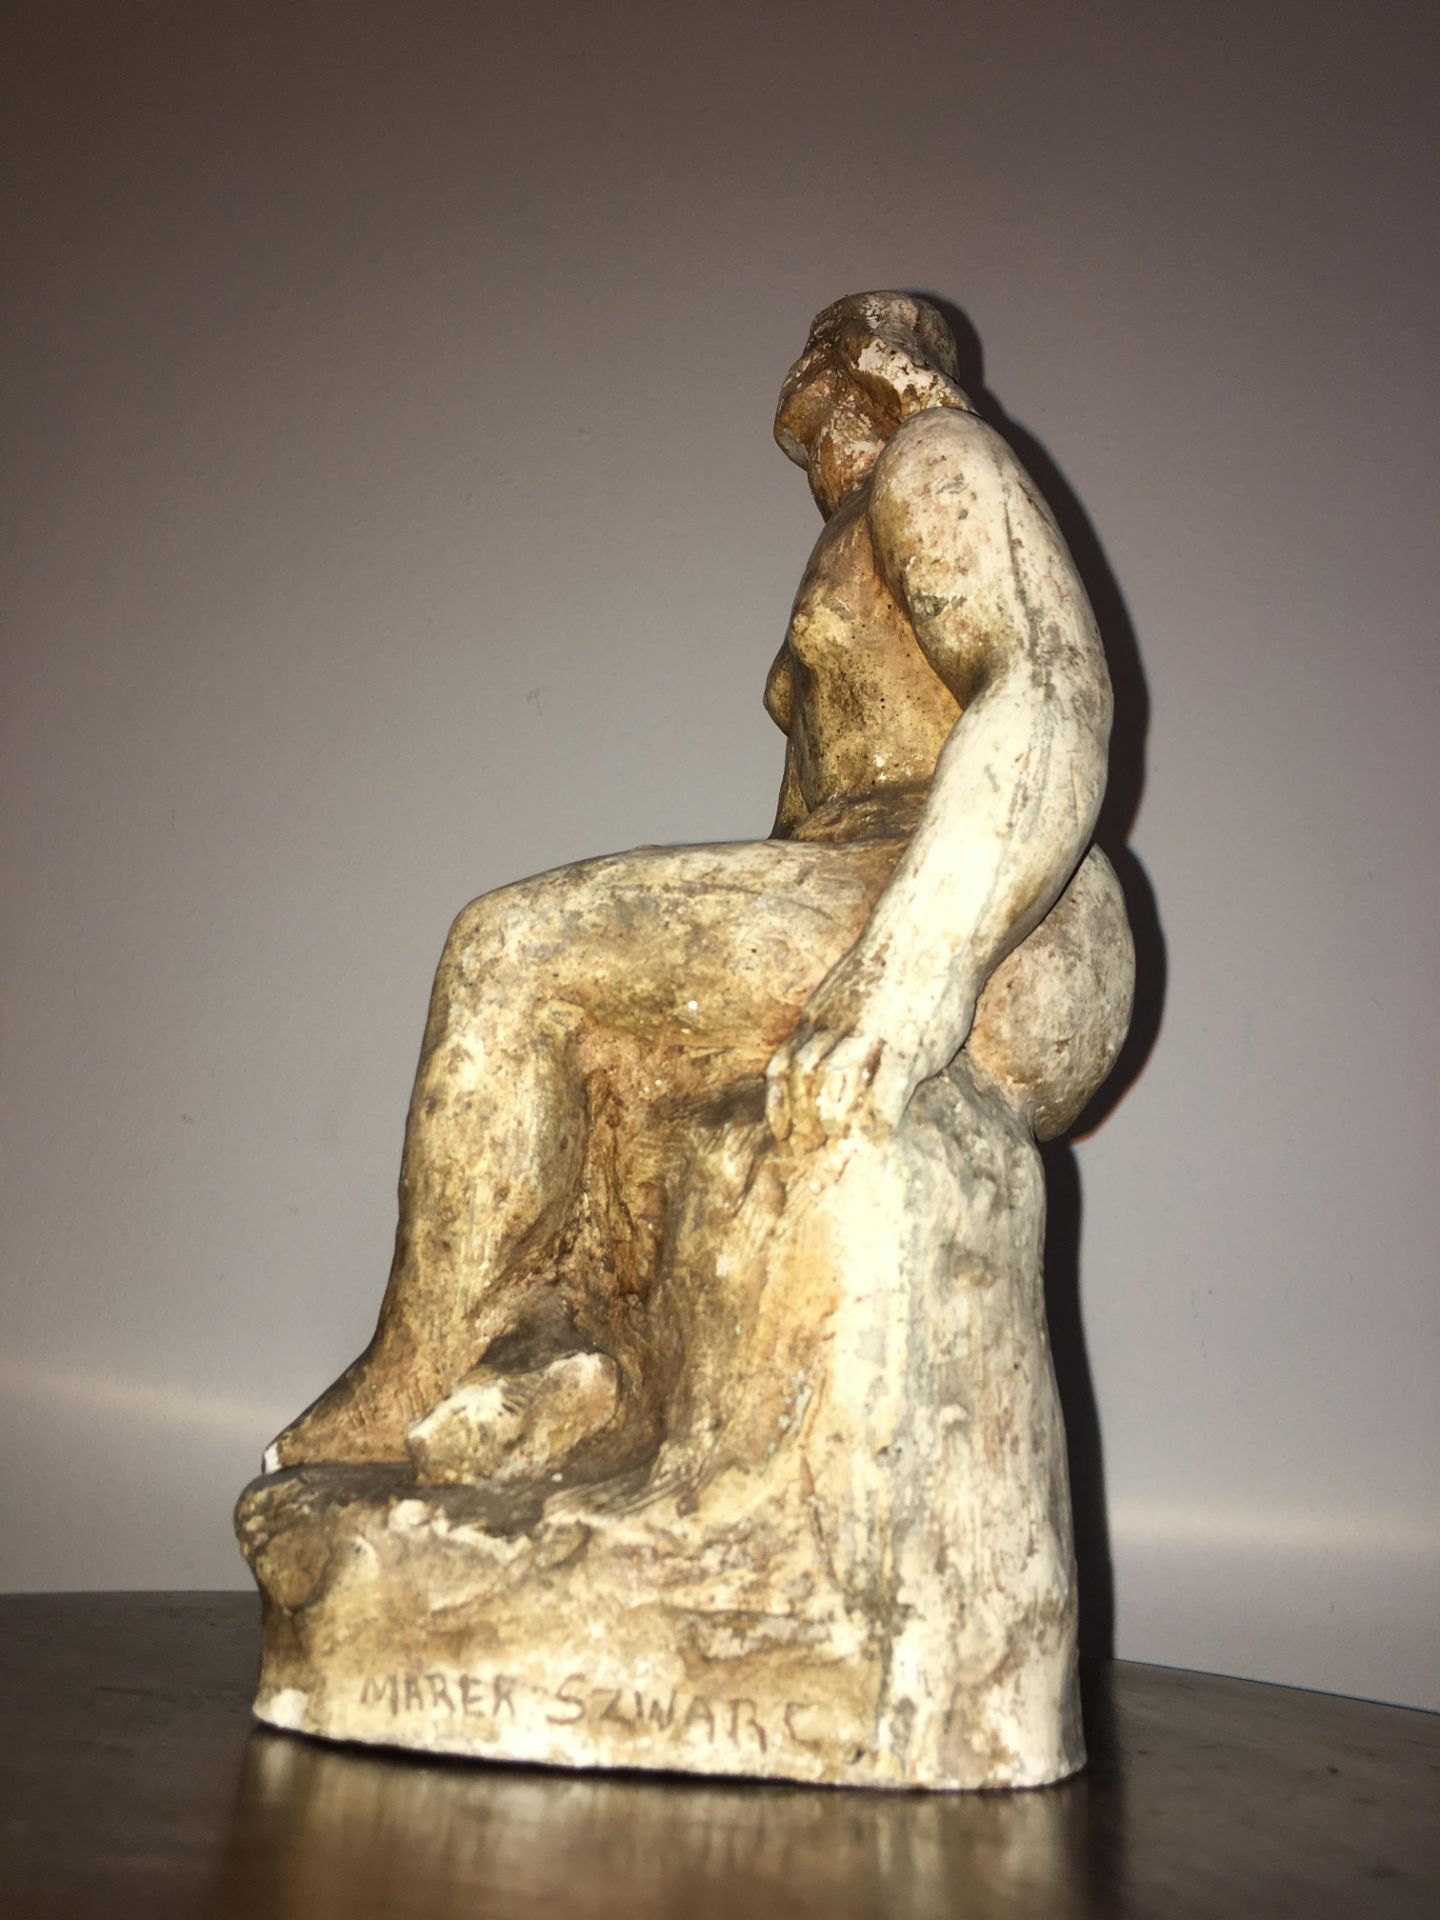 Seated female plaster sculpture signed by Marek Szwarc 1892-1958 - Image 2 of 6